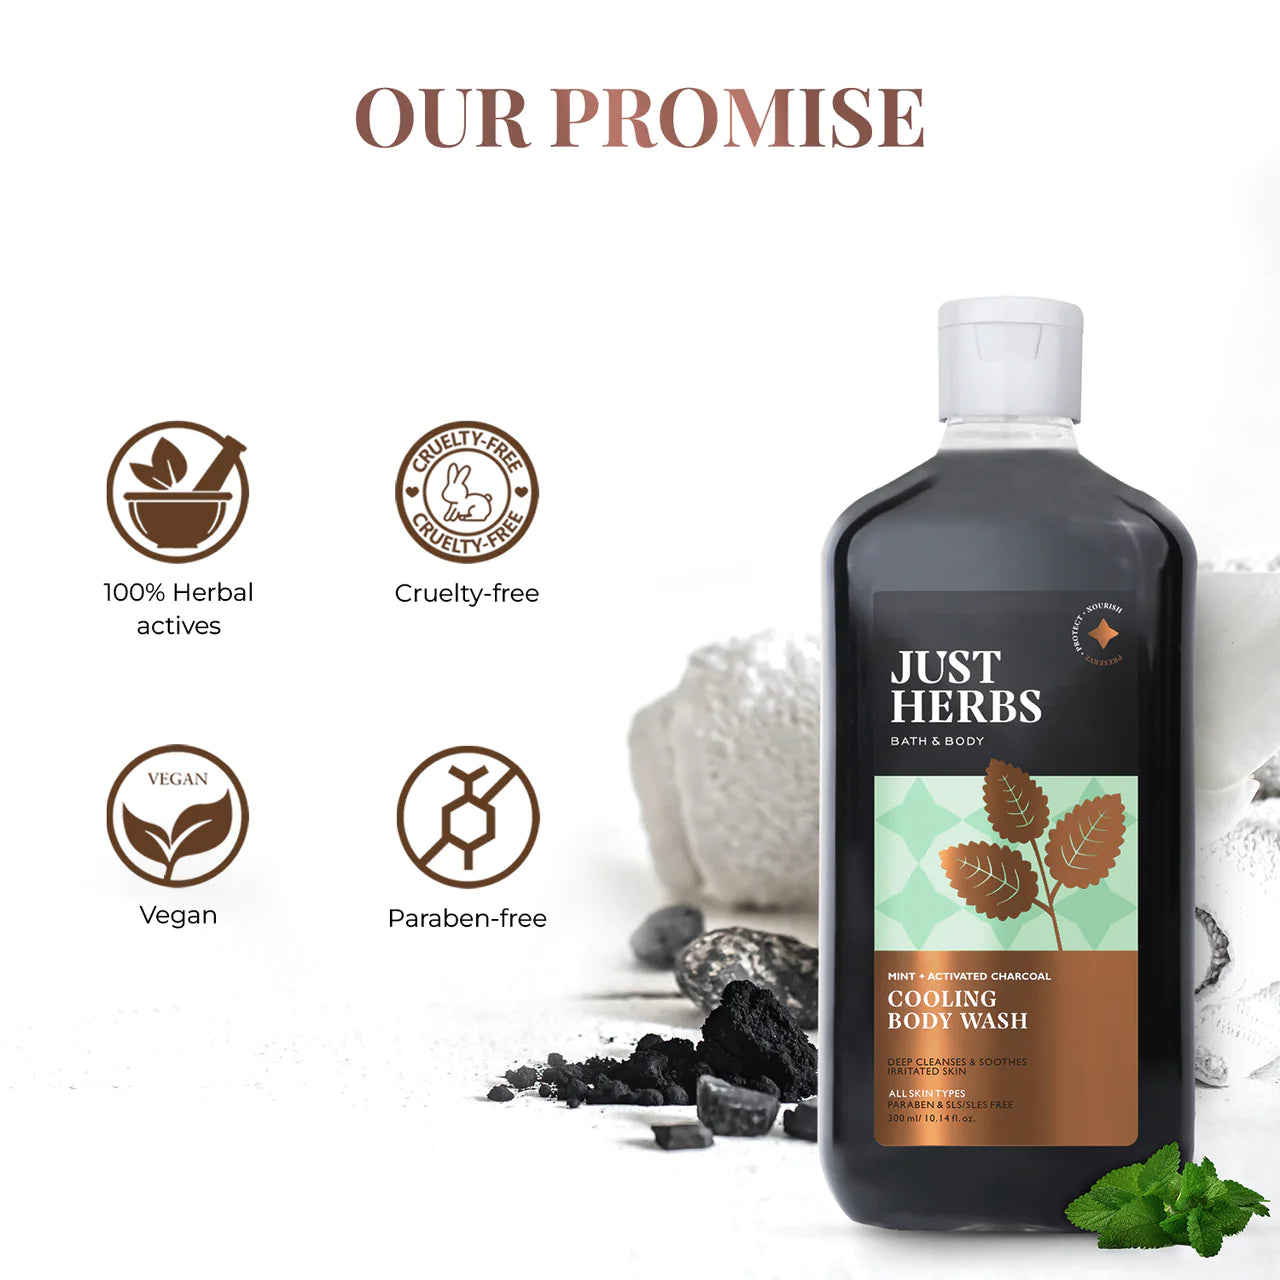 Mint Cooling Body Wash, Activated Charcoal, Just Herbs, Ayurveda Store NZ